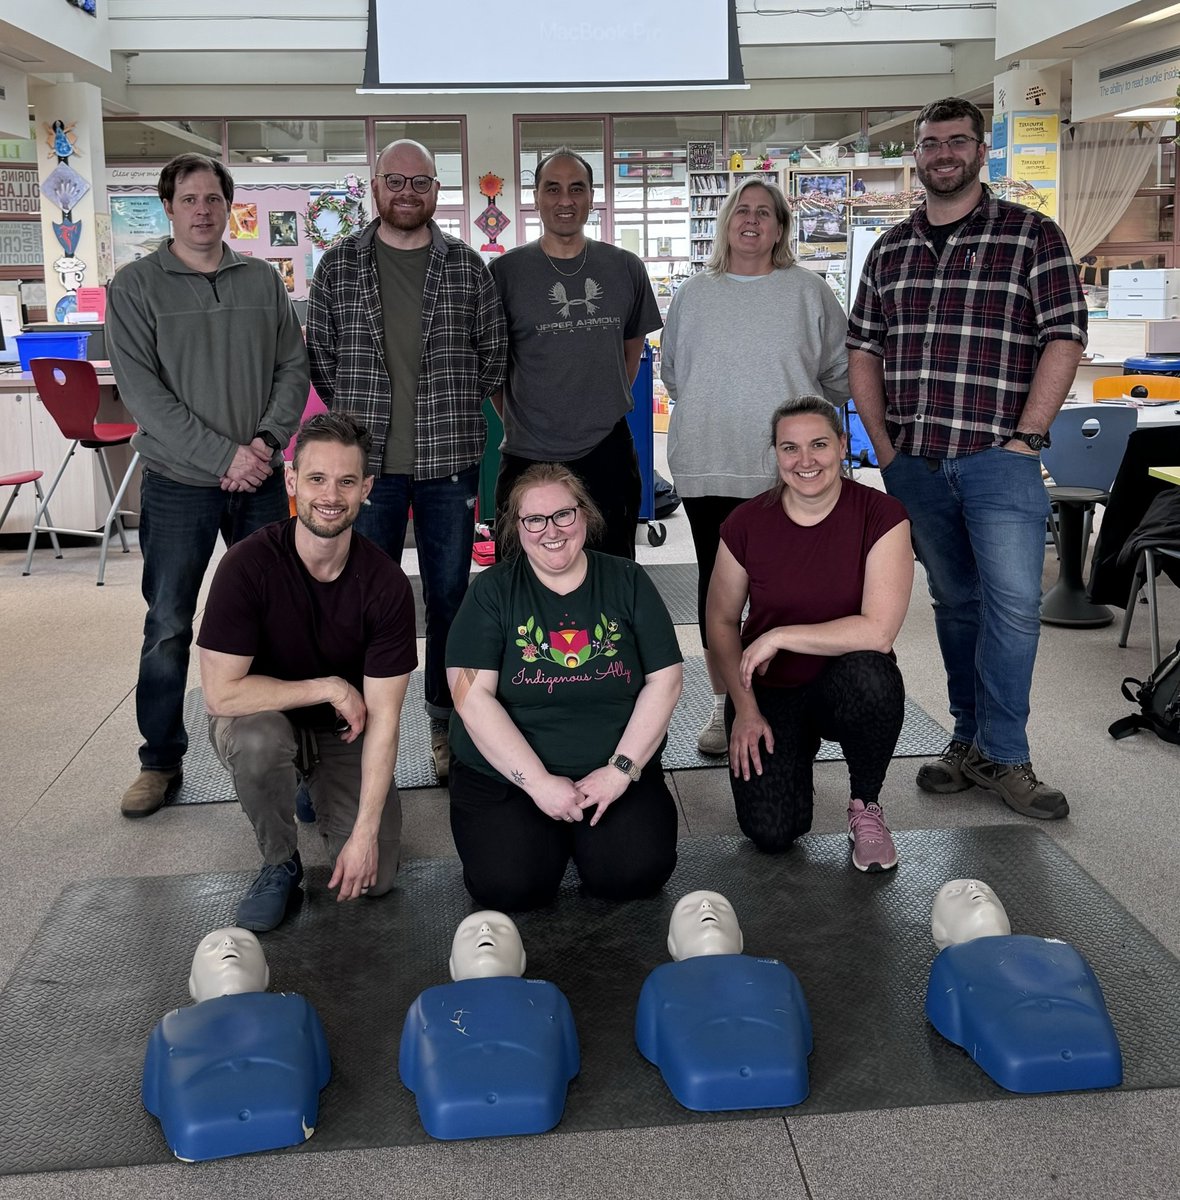 Congratulations to MORE #teachers trained as #CPR #AED instructors from @sd60! Now, MORE #PeaceRiverNorth students will be empowered to save lives through the ACT High School CPR & AED Program. @Daniel_Davies @bobzimmermp @fortstjohn @AmgenCanadaGM @AstraZenecaCA @bc_ehs